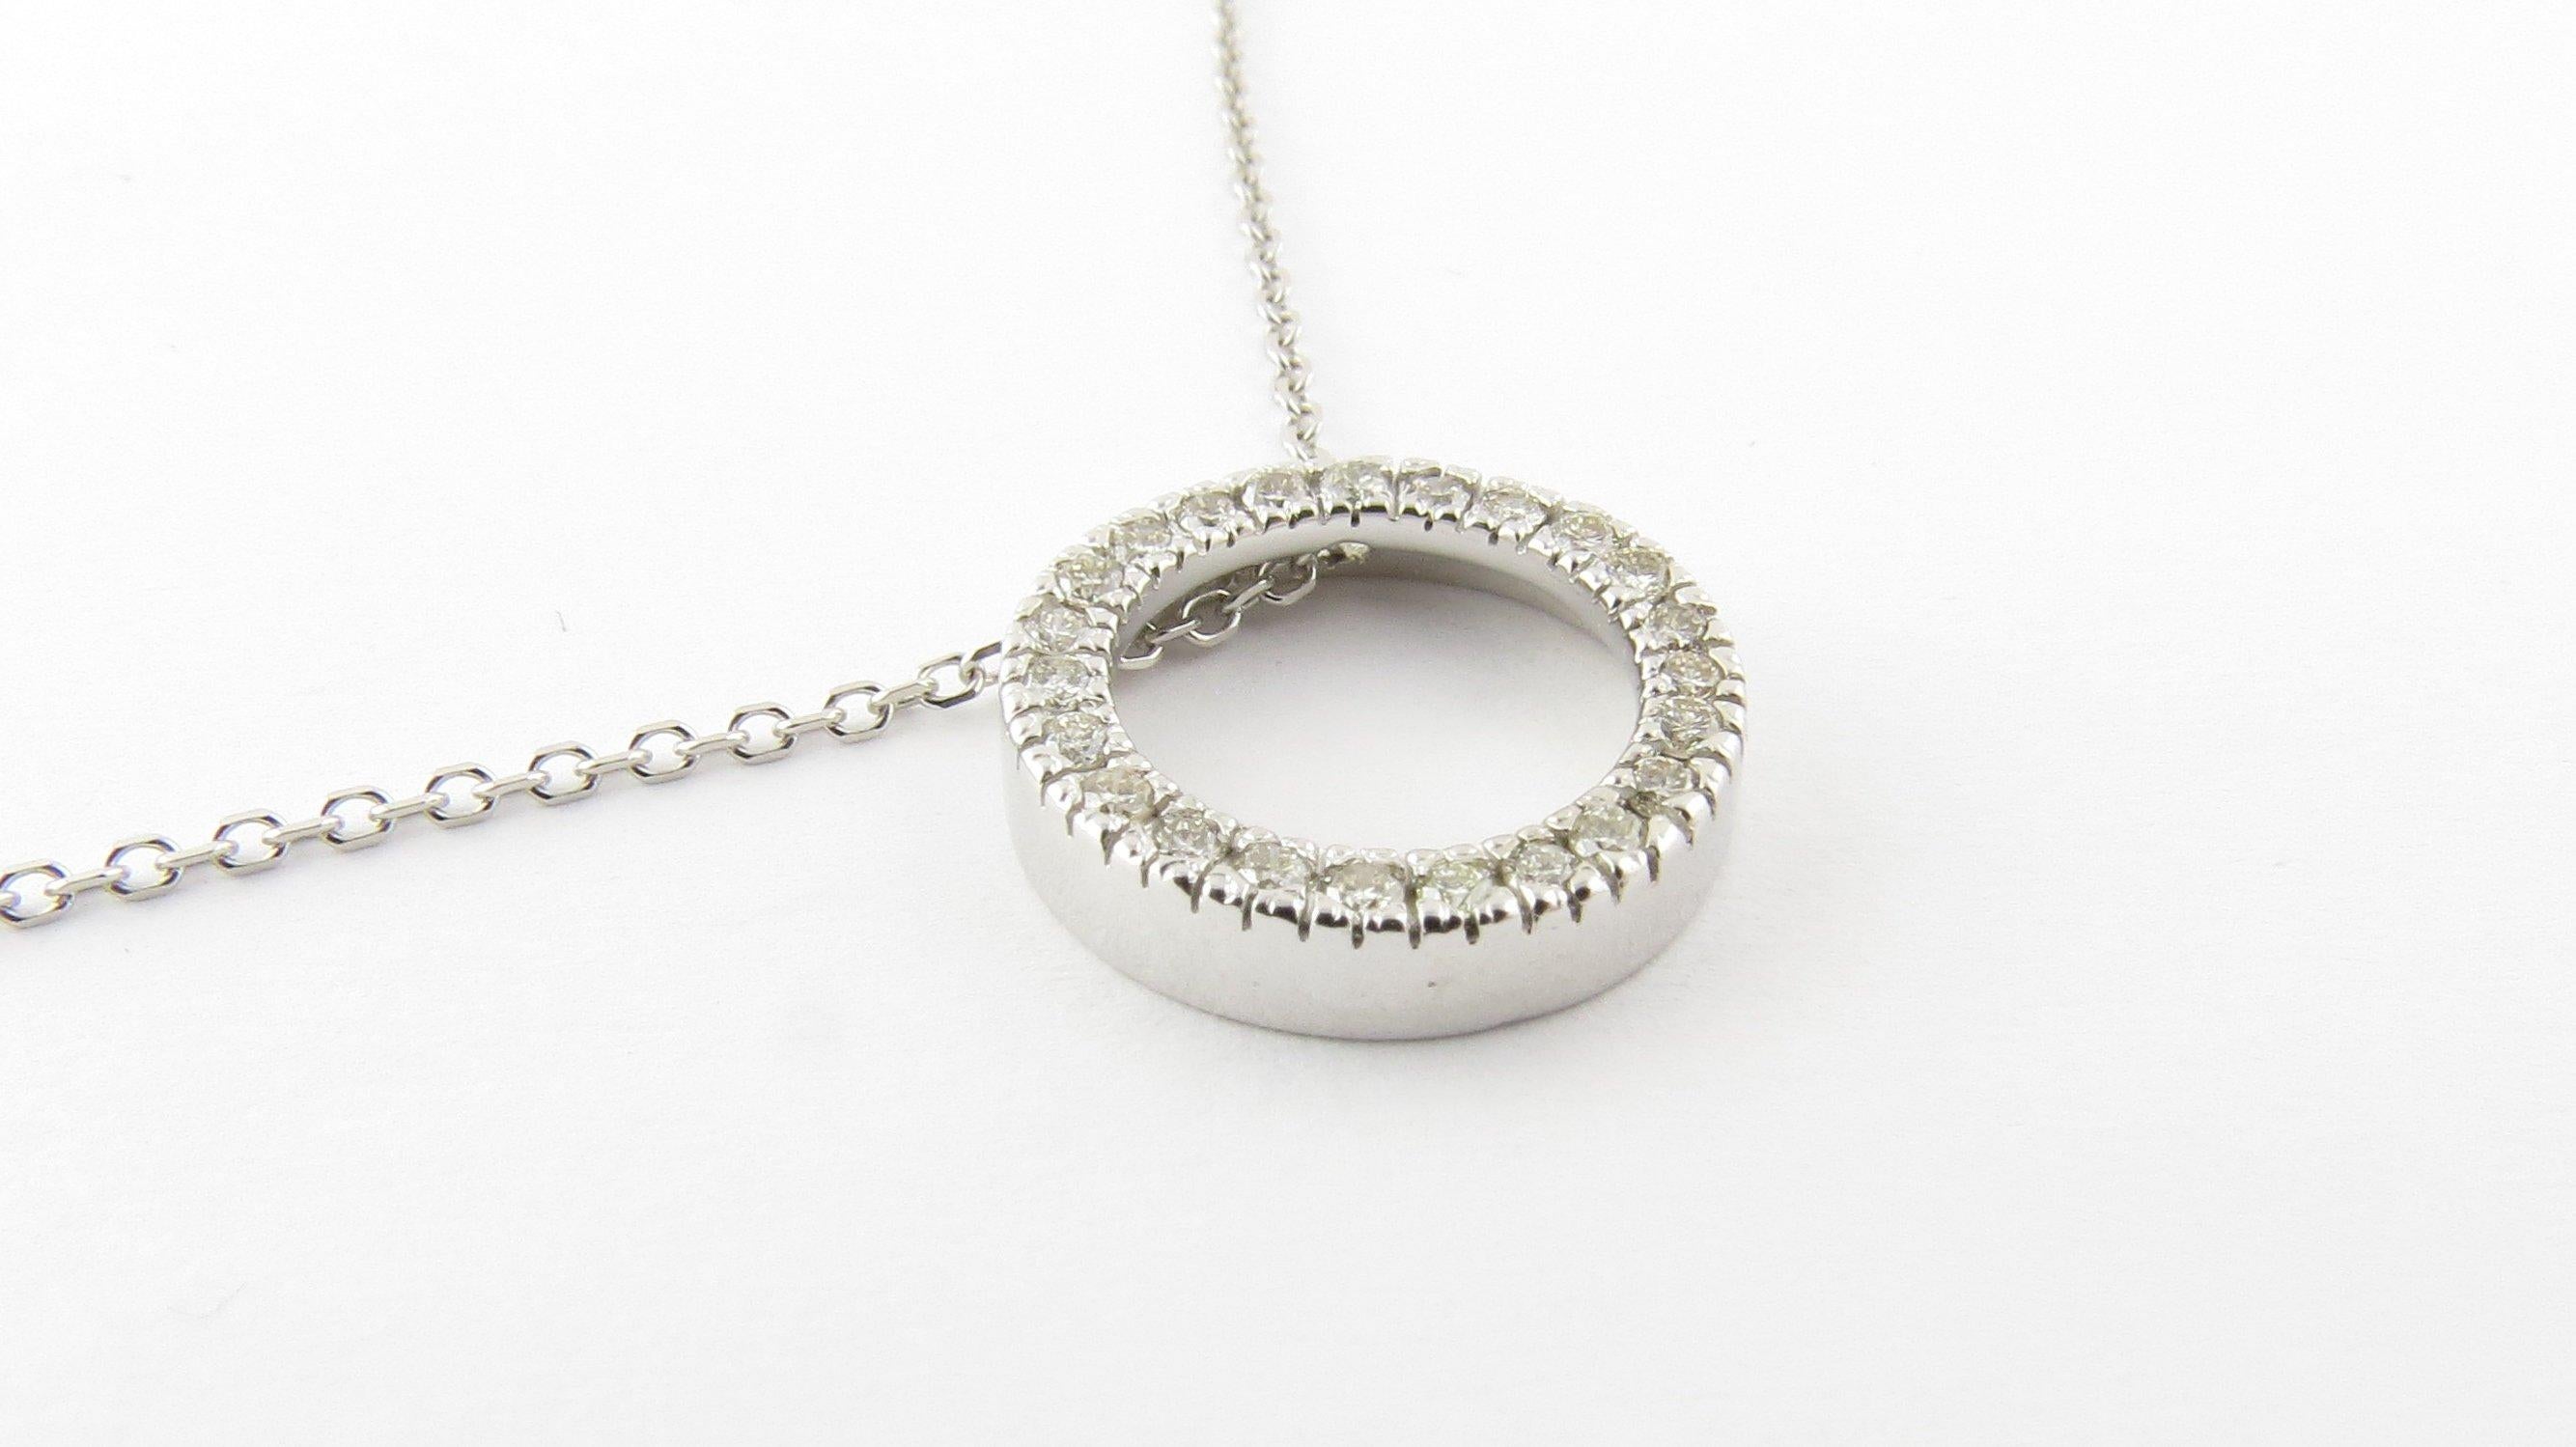 Vintage 14 Karat White Gold Diamond Pendant Necklace- 
This sparkling circle pendant features 24 round brilliant cut diamonds set in classic 14K white gold. 
Suspended from a classic cable necklace. 
Approximate total diamond weight: .24 ct.